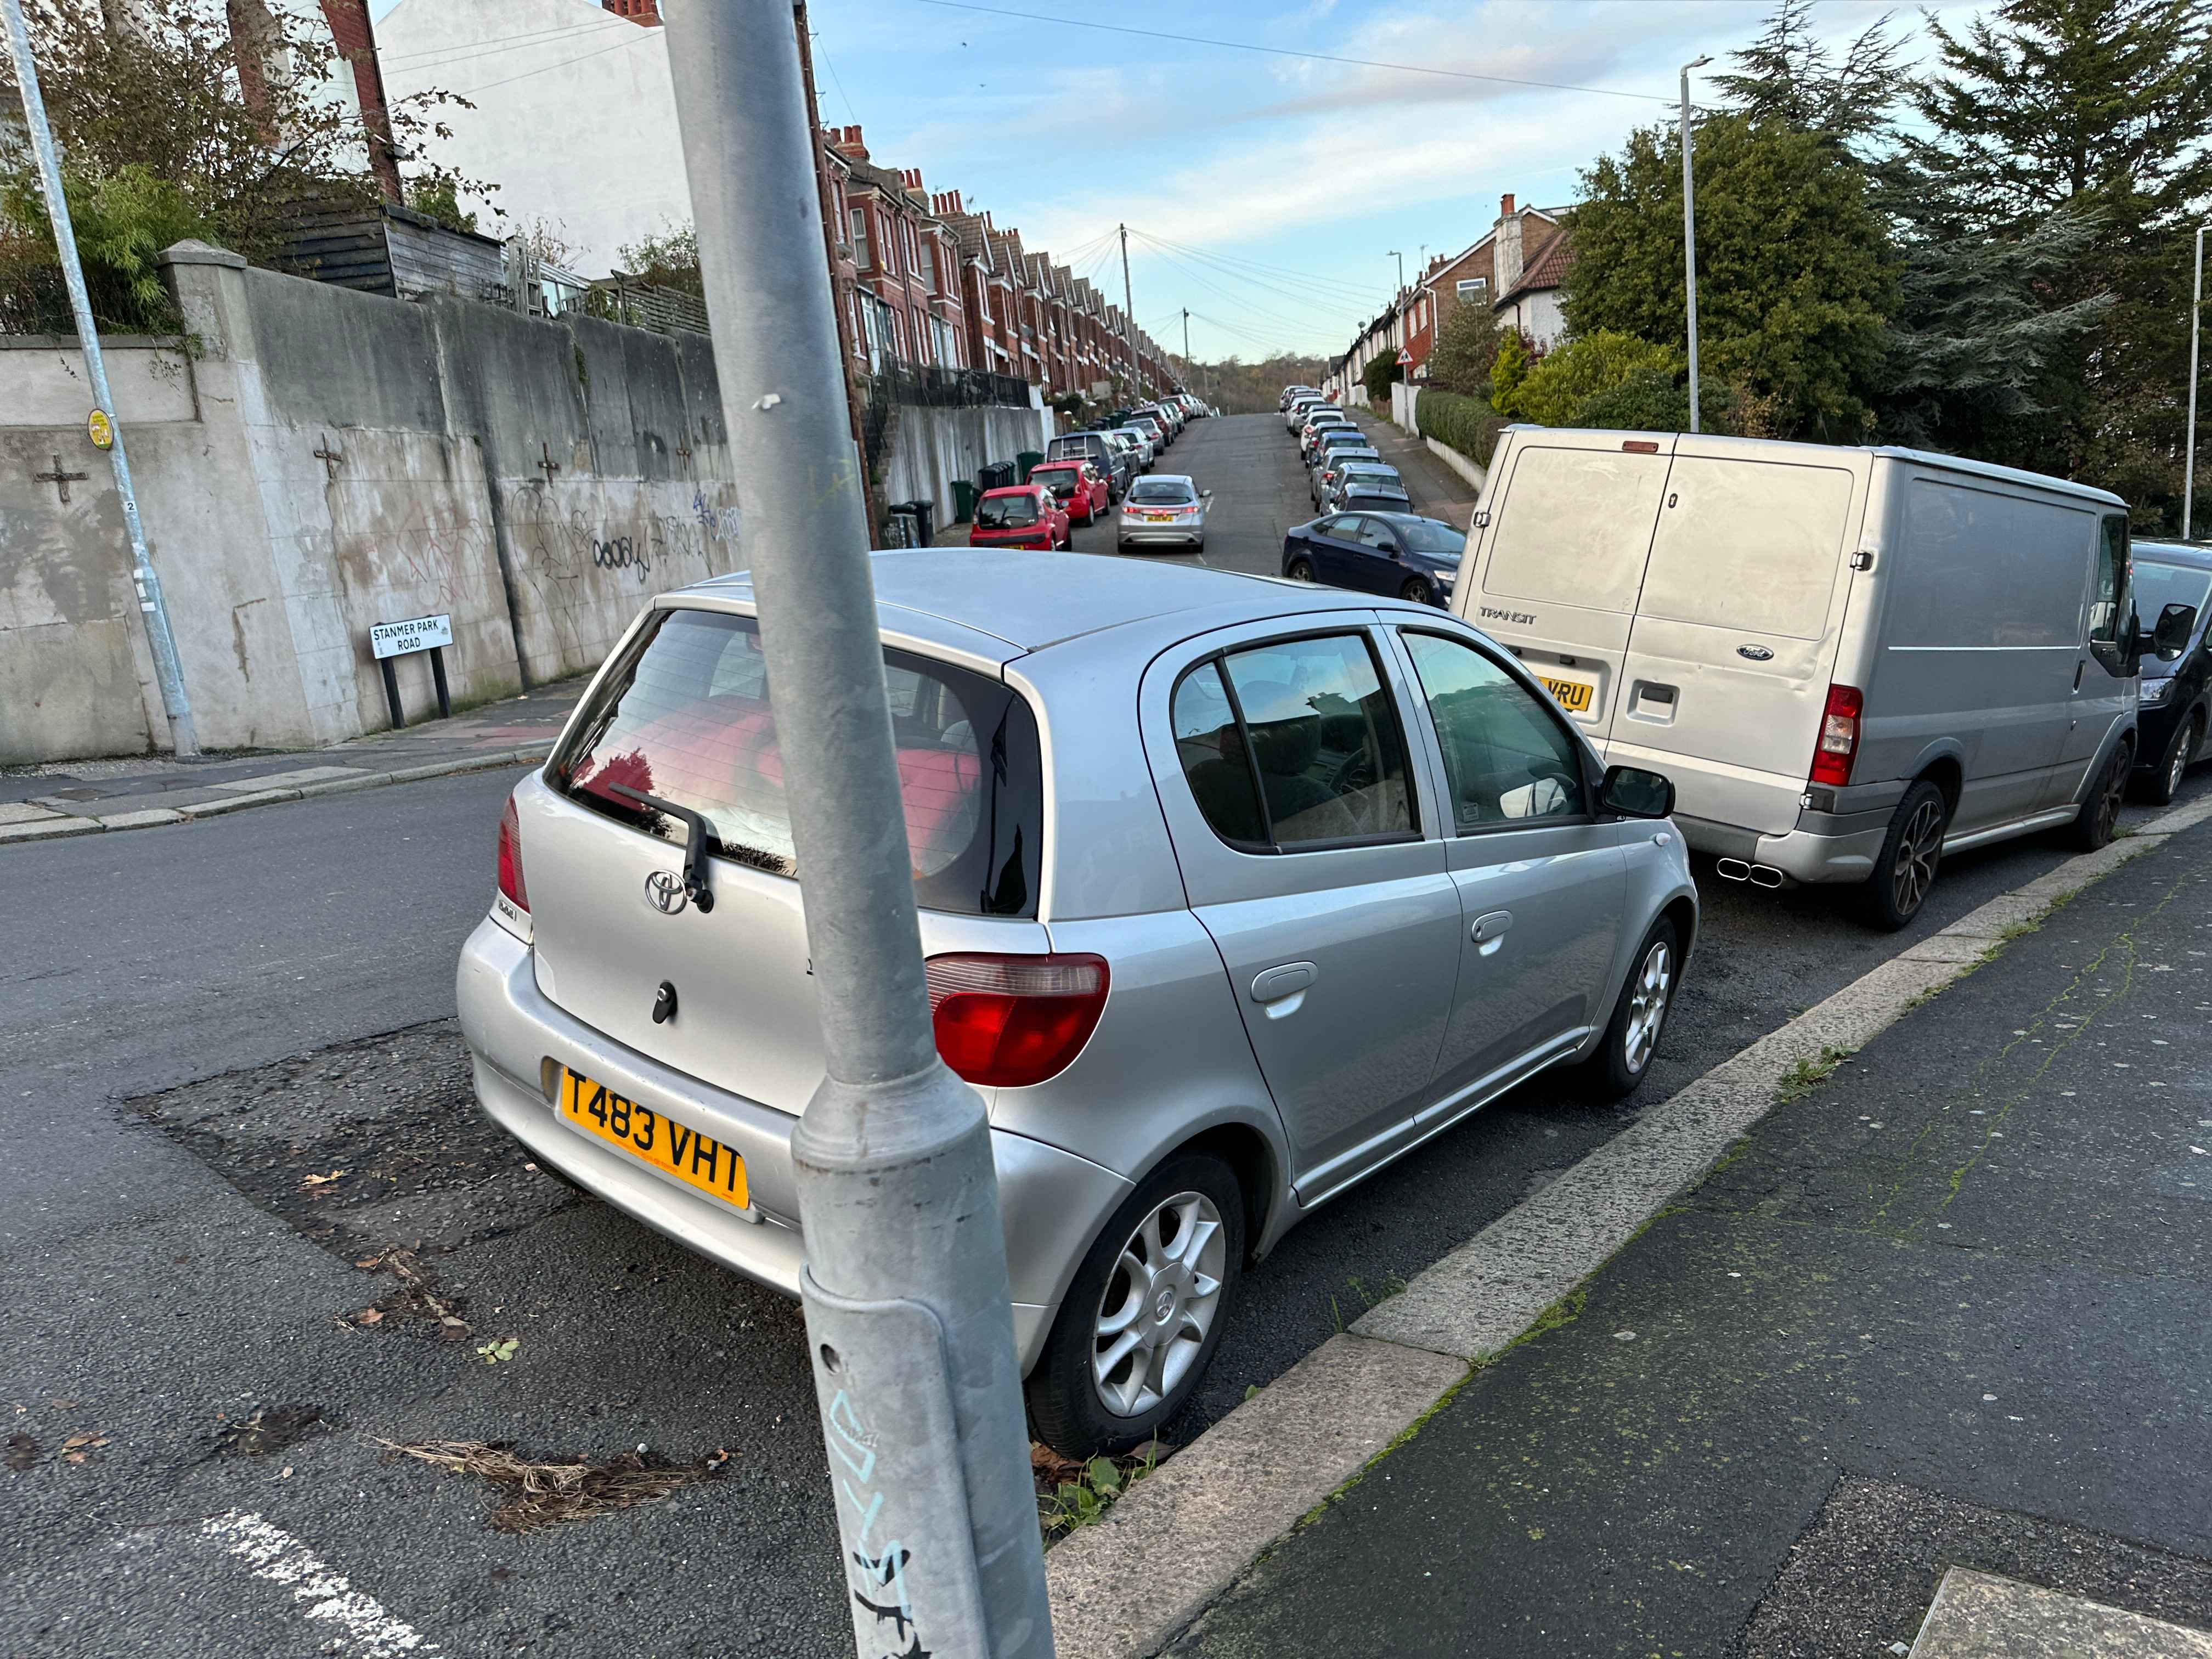 Photograph of T483 VHT - a Silver Toyota Yaris parked in Hollingdean by a non-resident. The sixth of fourteen photographs supplied by the residents of Hollingdean.